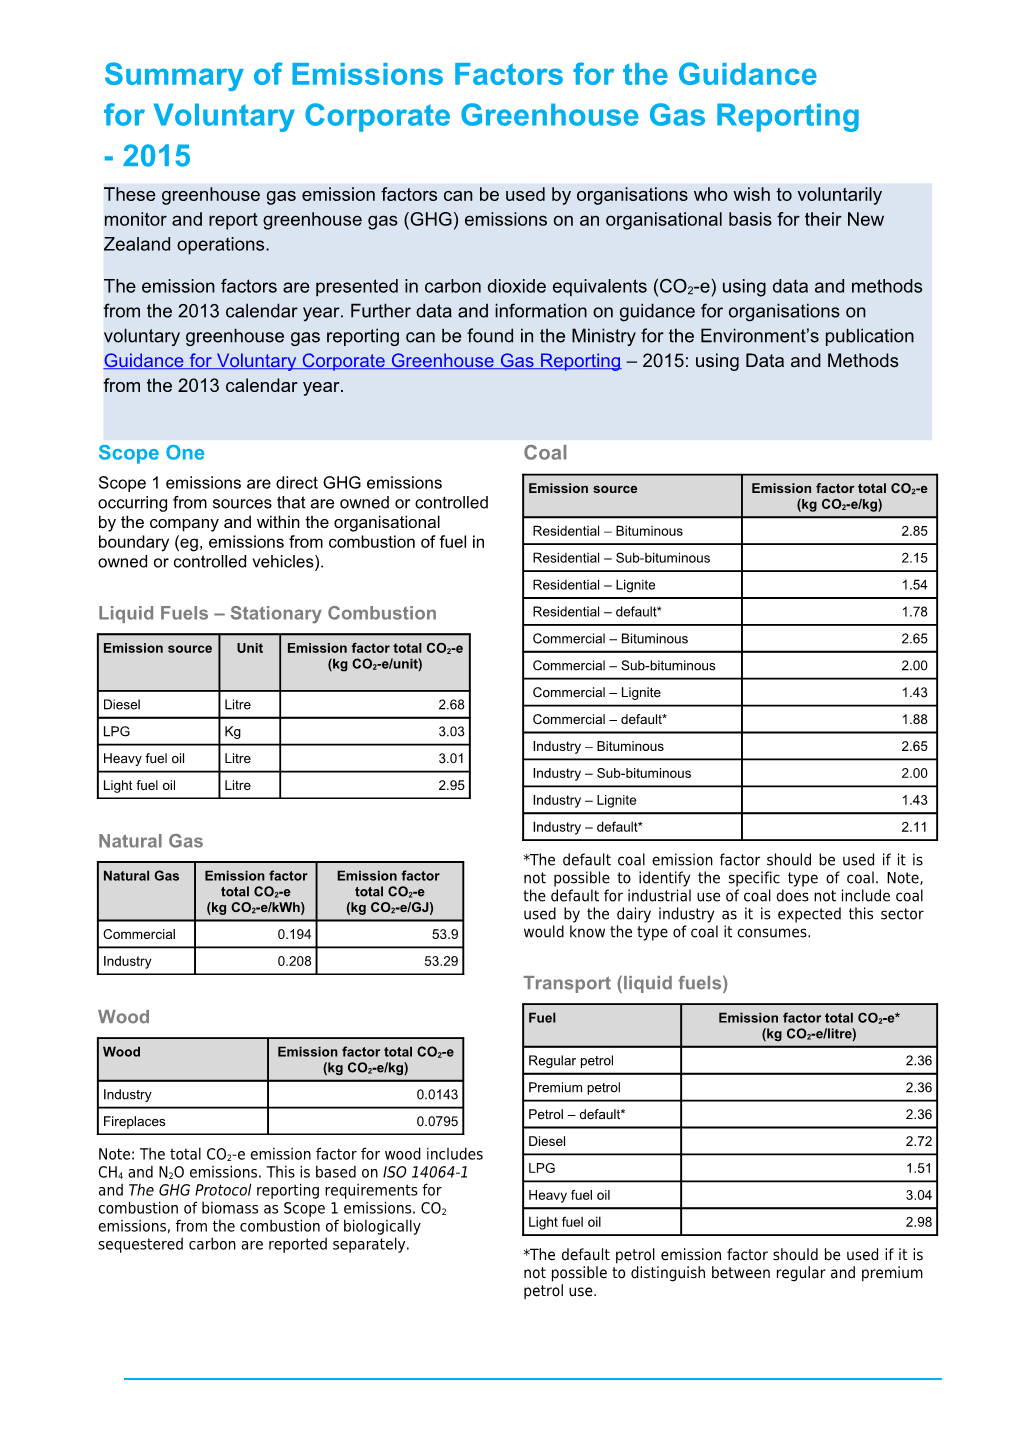 Voluntary-Greenhouse-Gas-Reporting-Summary-Tables-Emissions-Factors-2015-Final